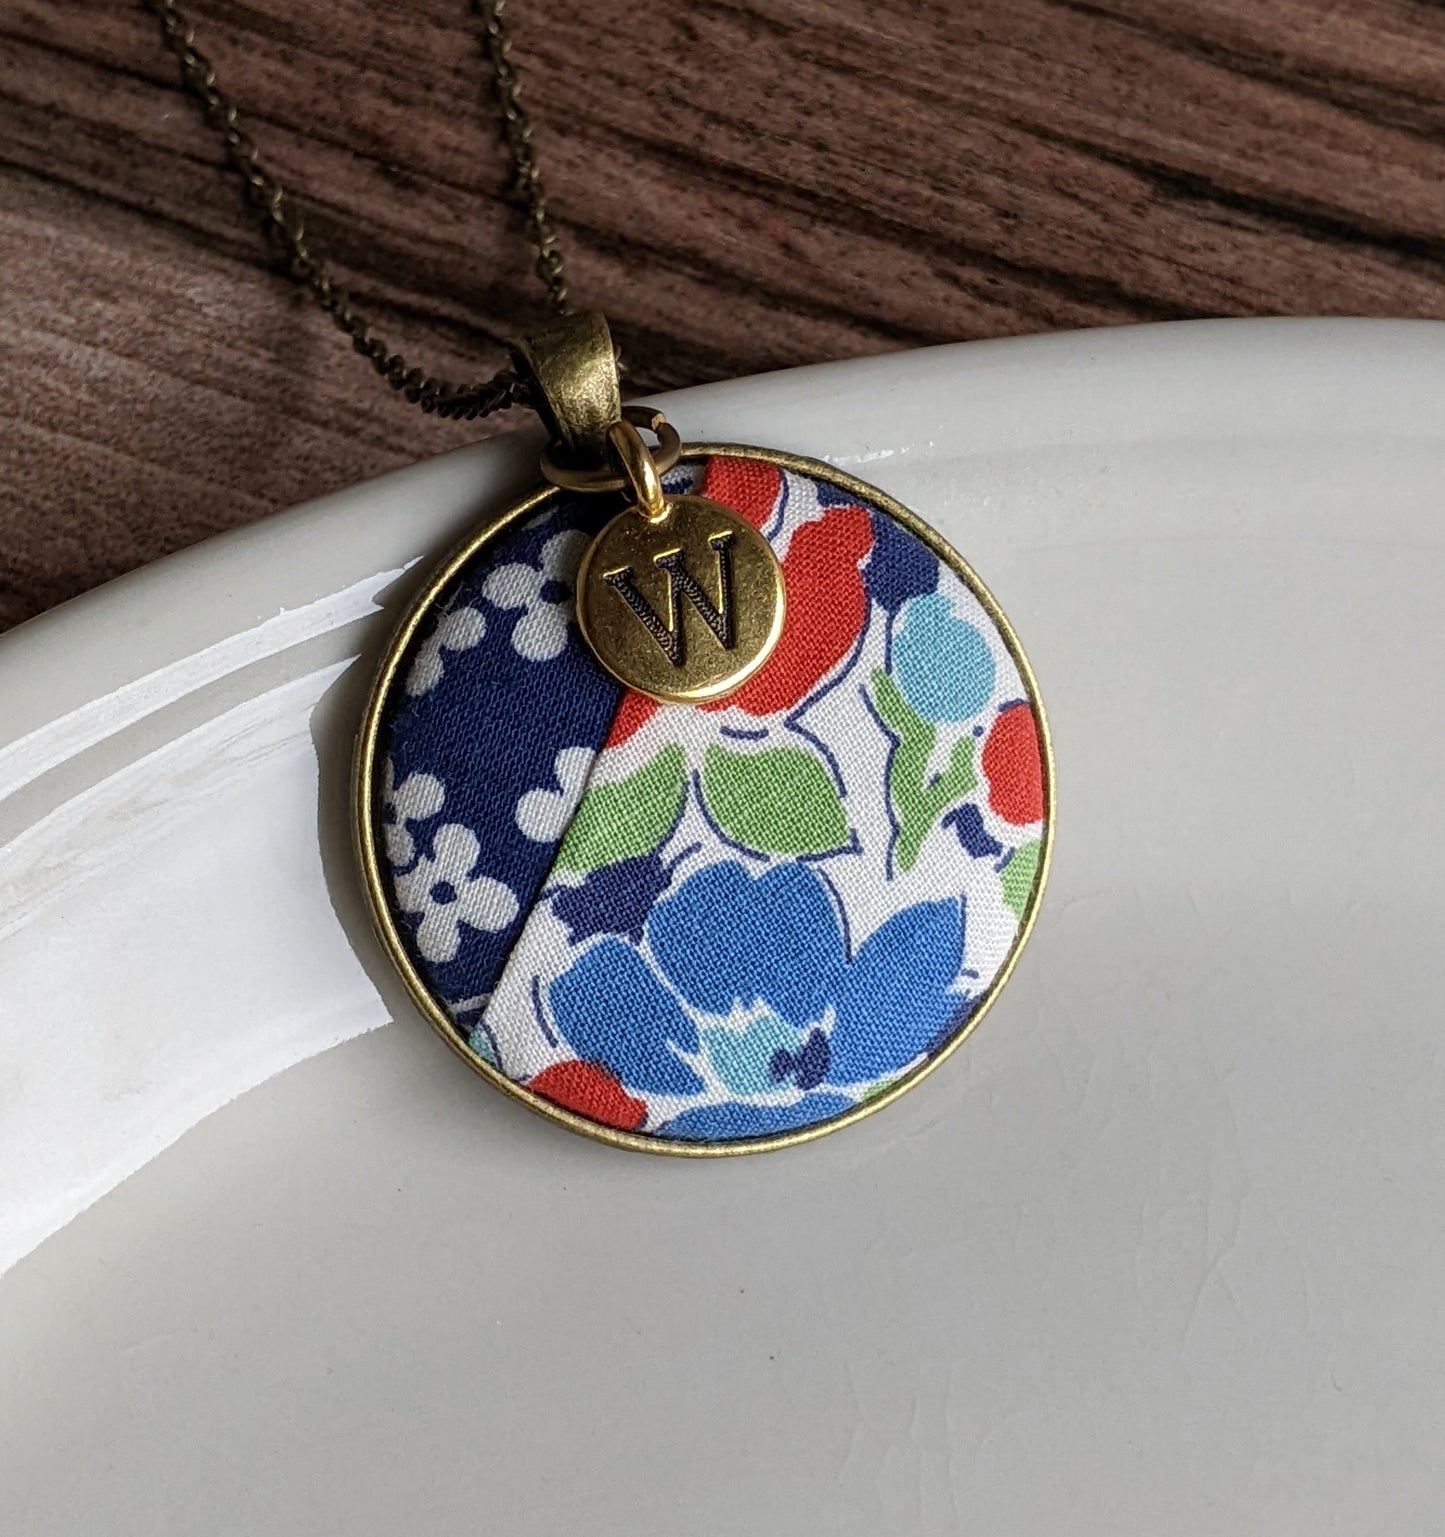 Vintage Floral Fabric Quilt Pendant With Initial Charm - Blue, Green, Red, White